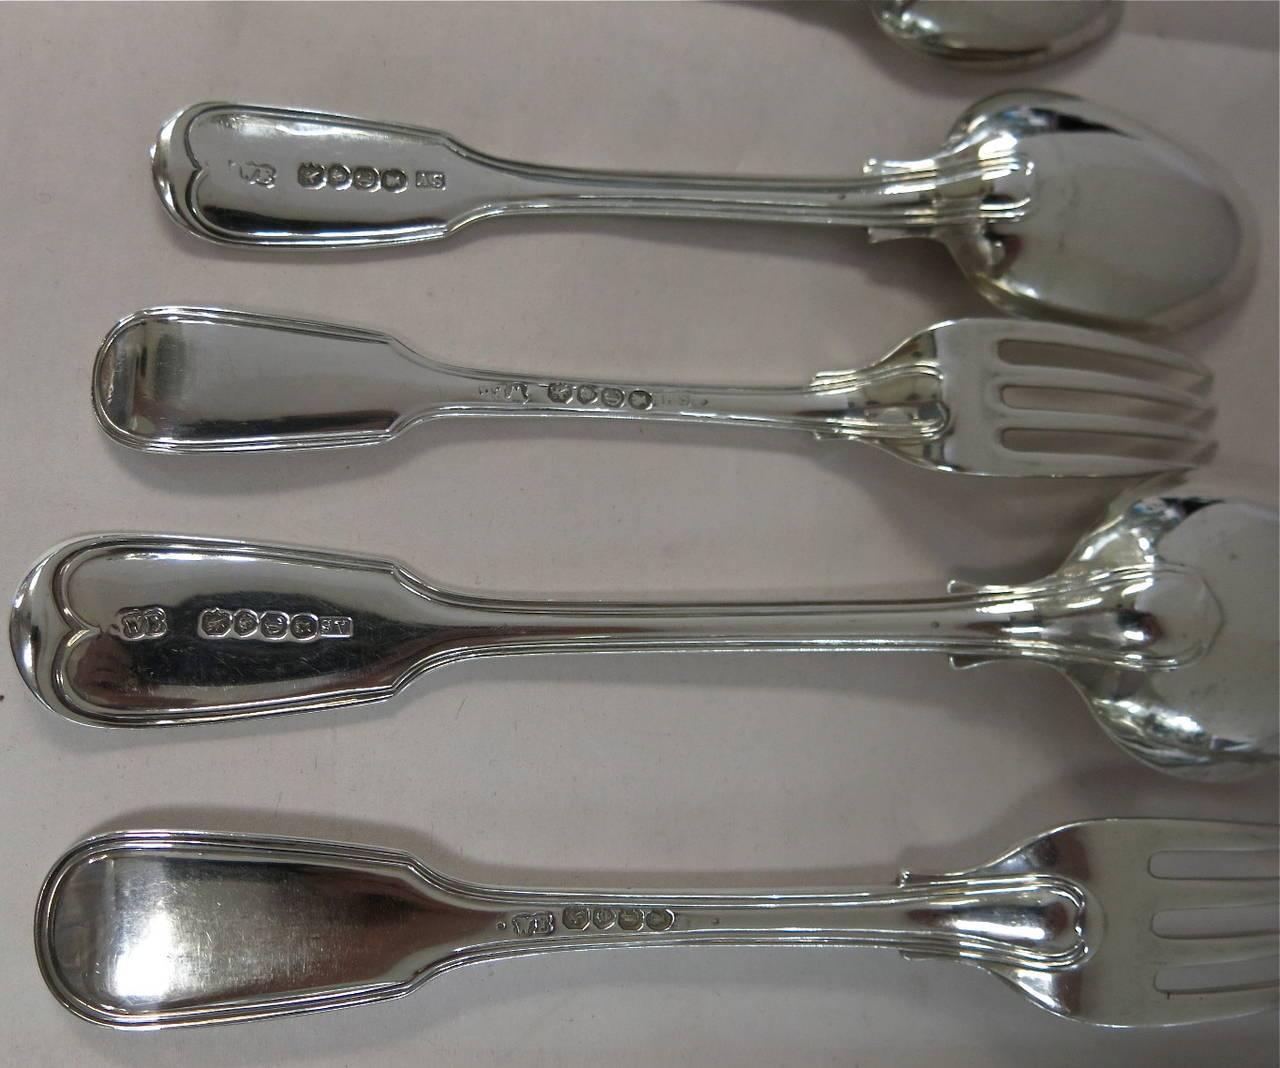 British Victorian English Sterling Silver Flatware Set for 12 People